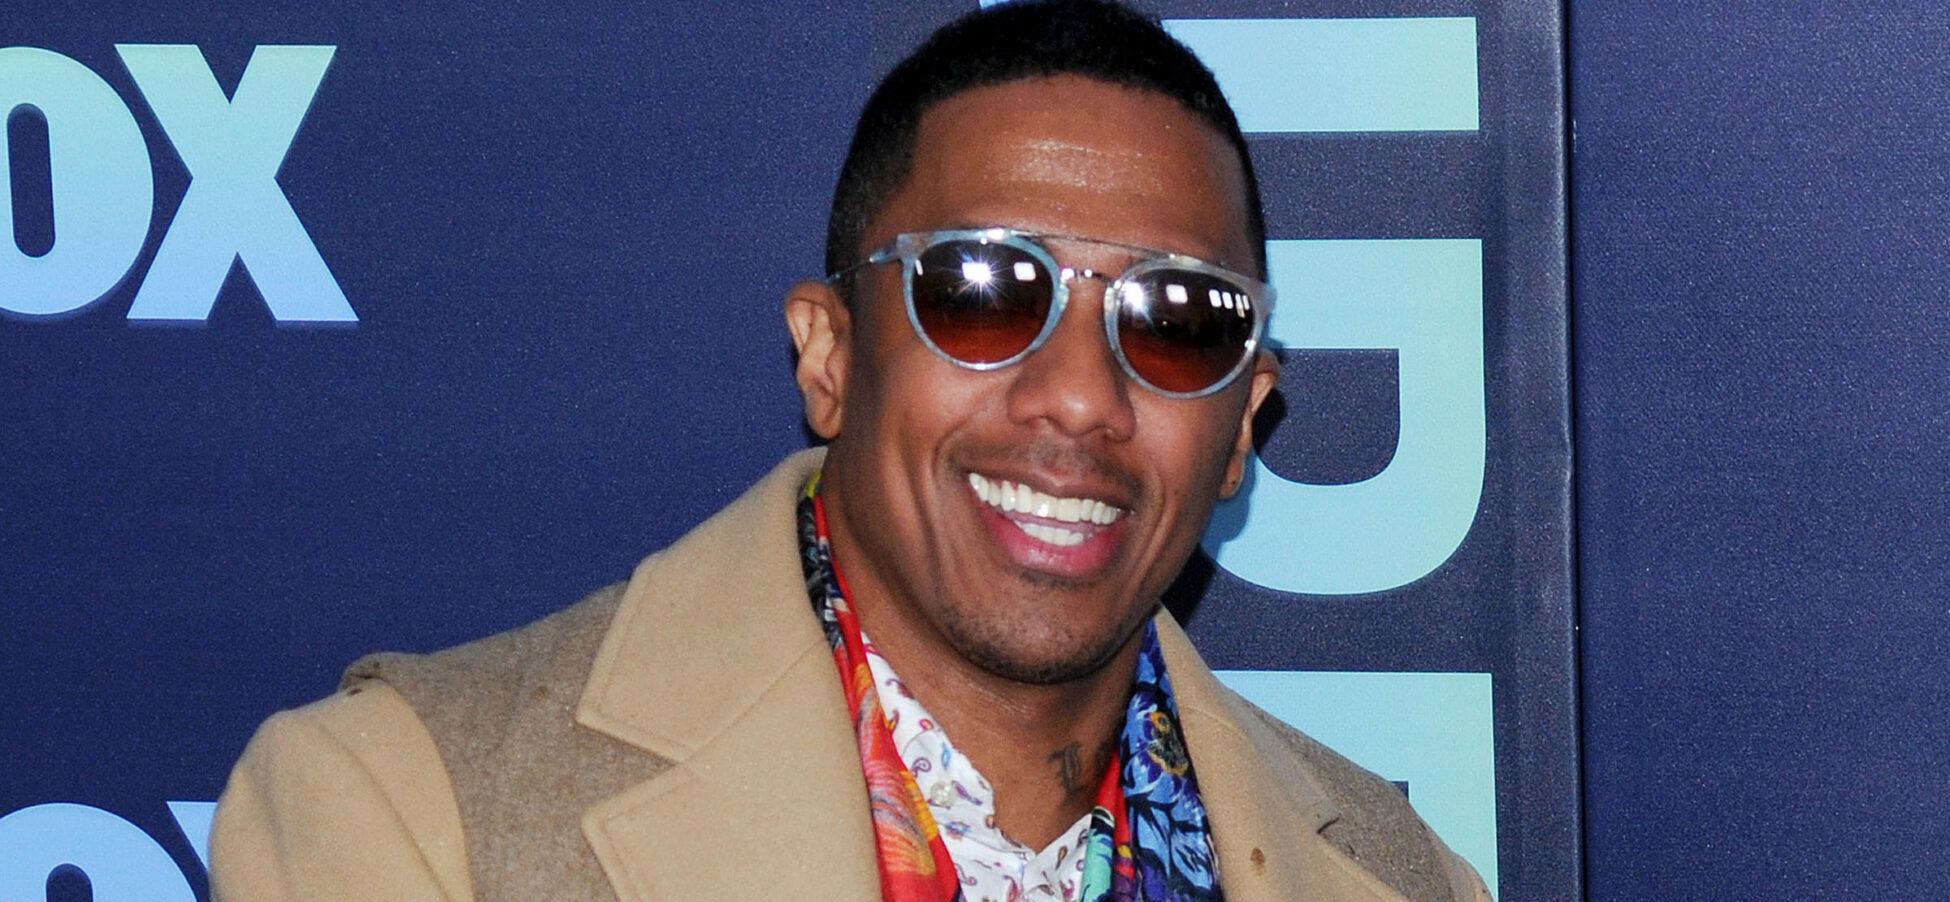 Nick Cannon Calls Marriage To Mariah Carey ‘Greatest Experience,’ But NOT AGAIN!